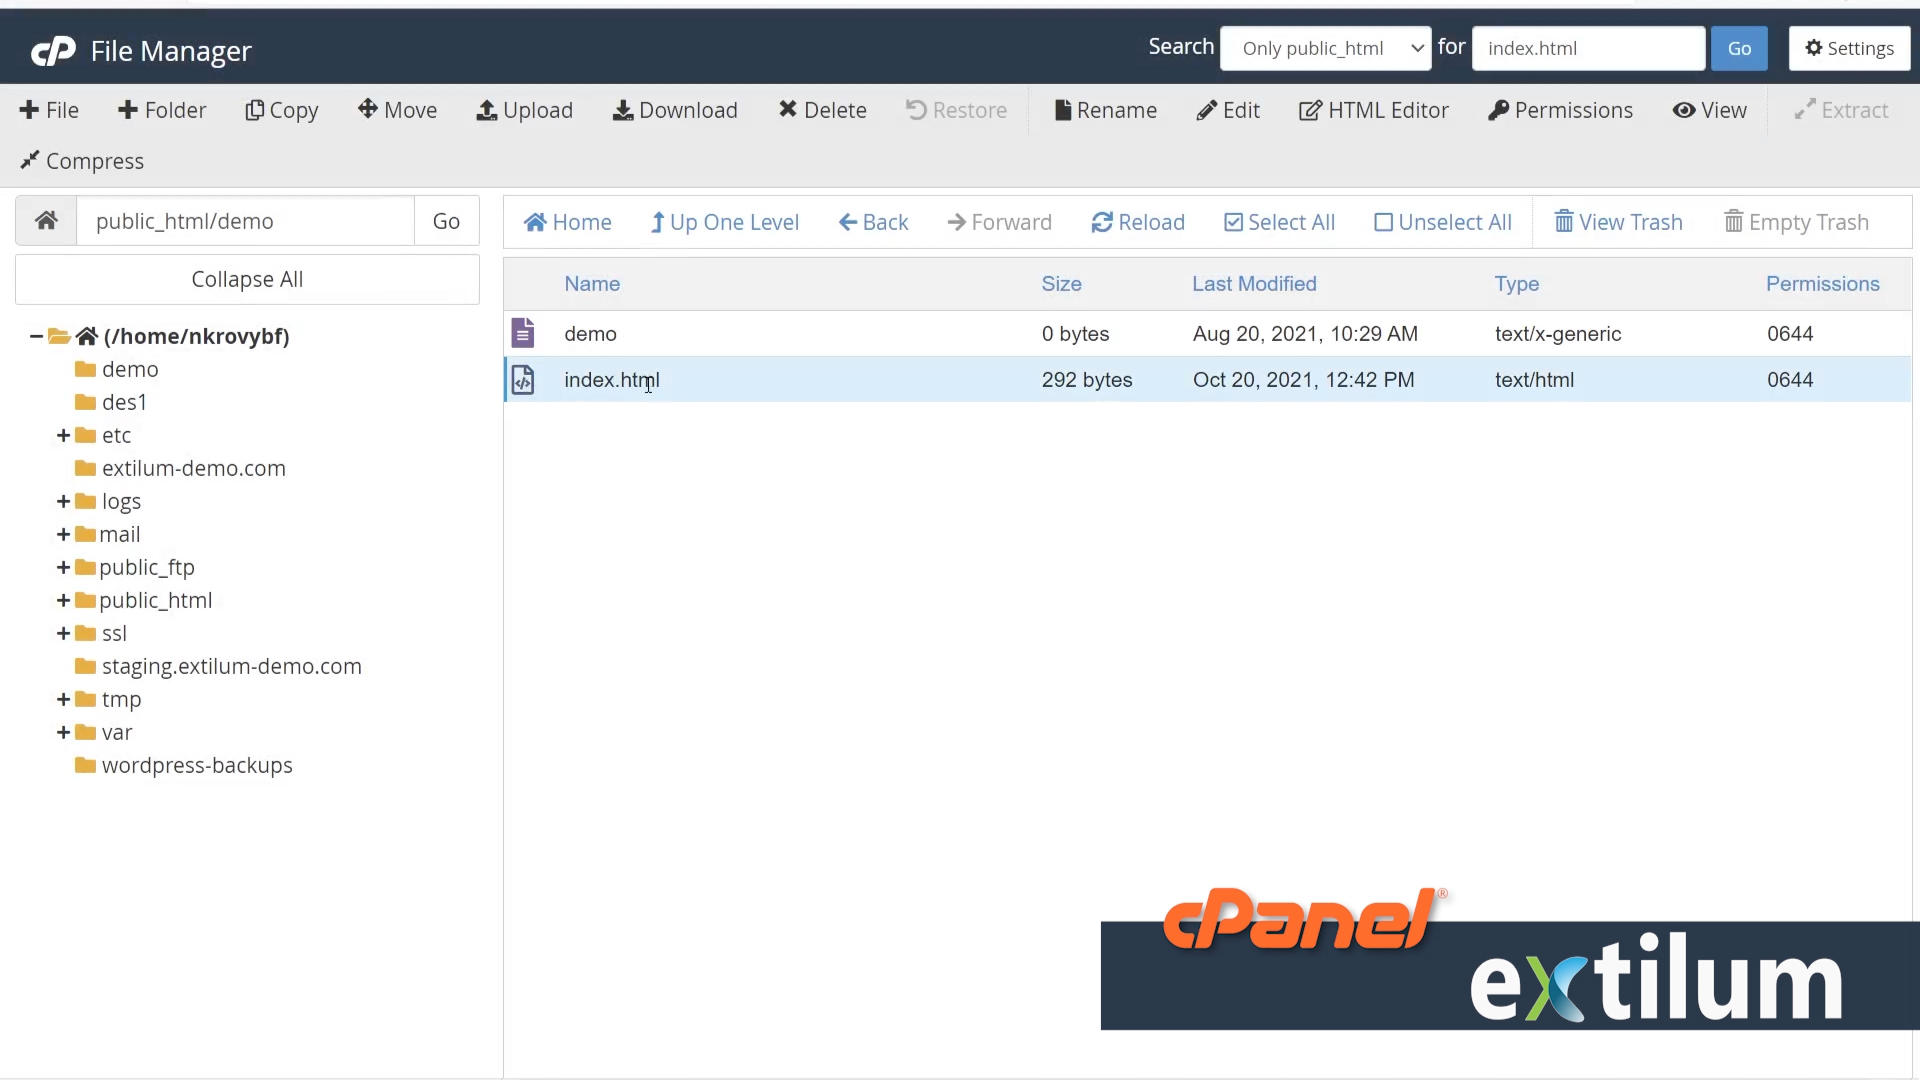 Extilum cPanel - File Manager - search